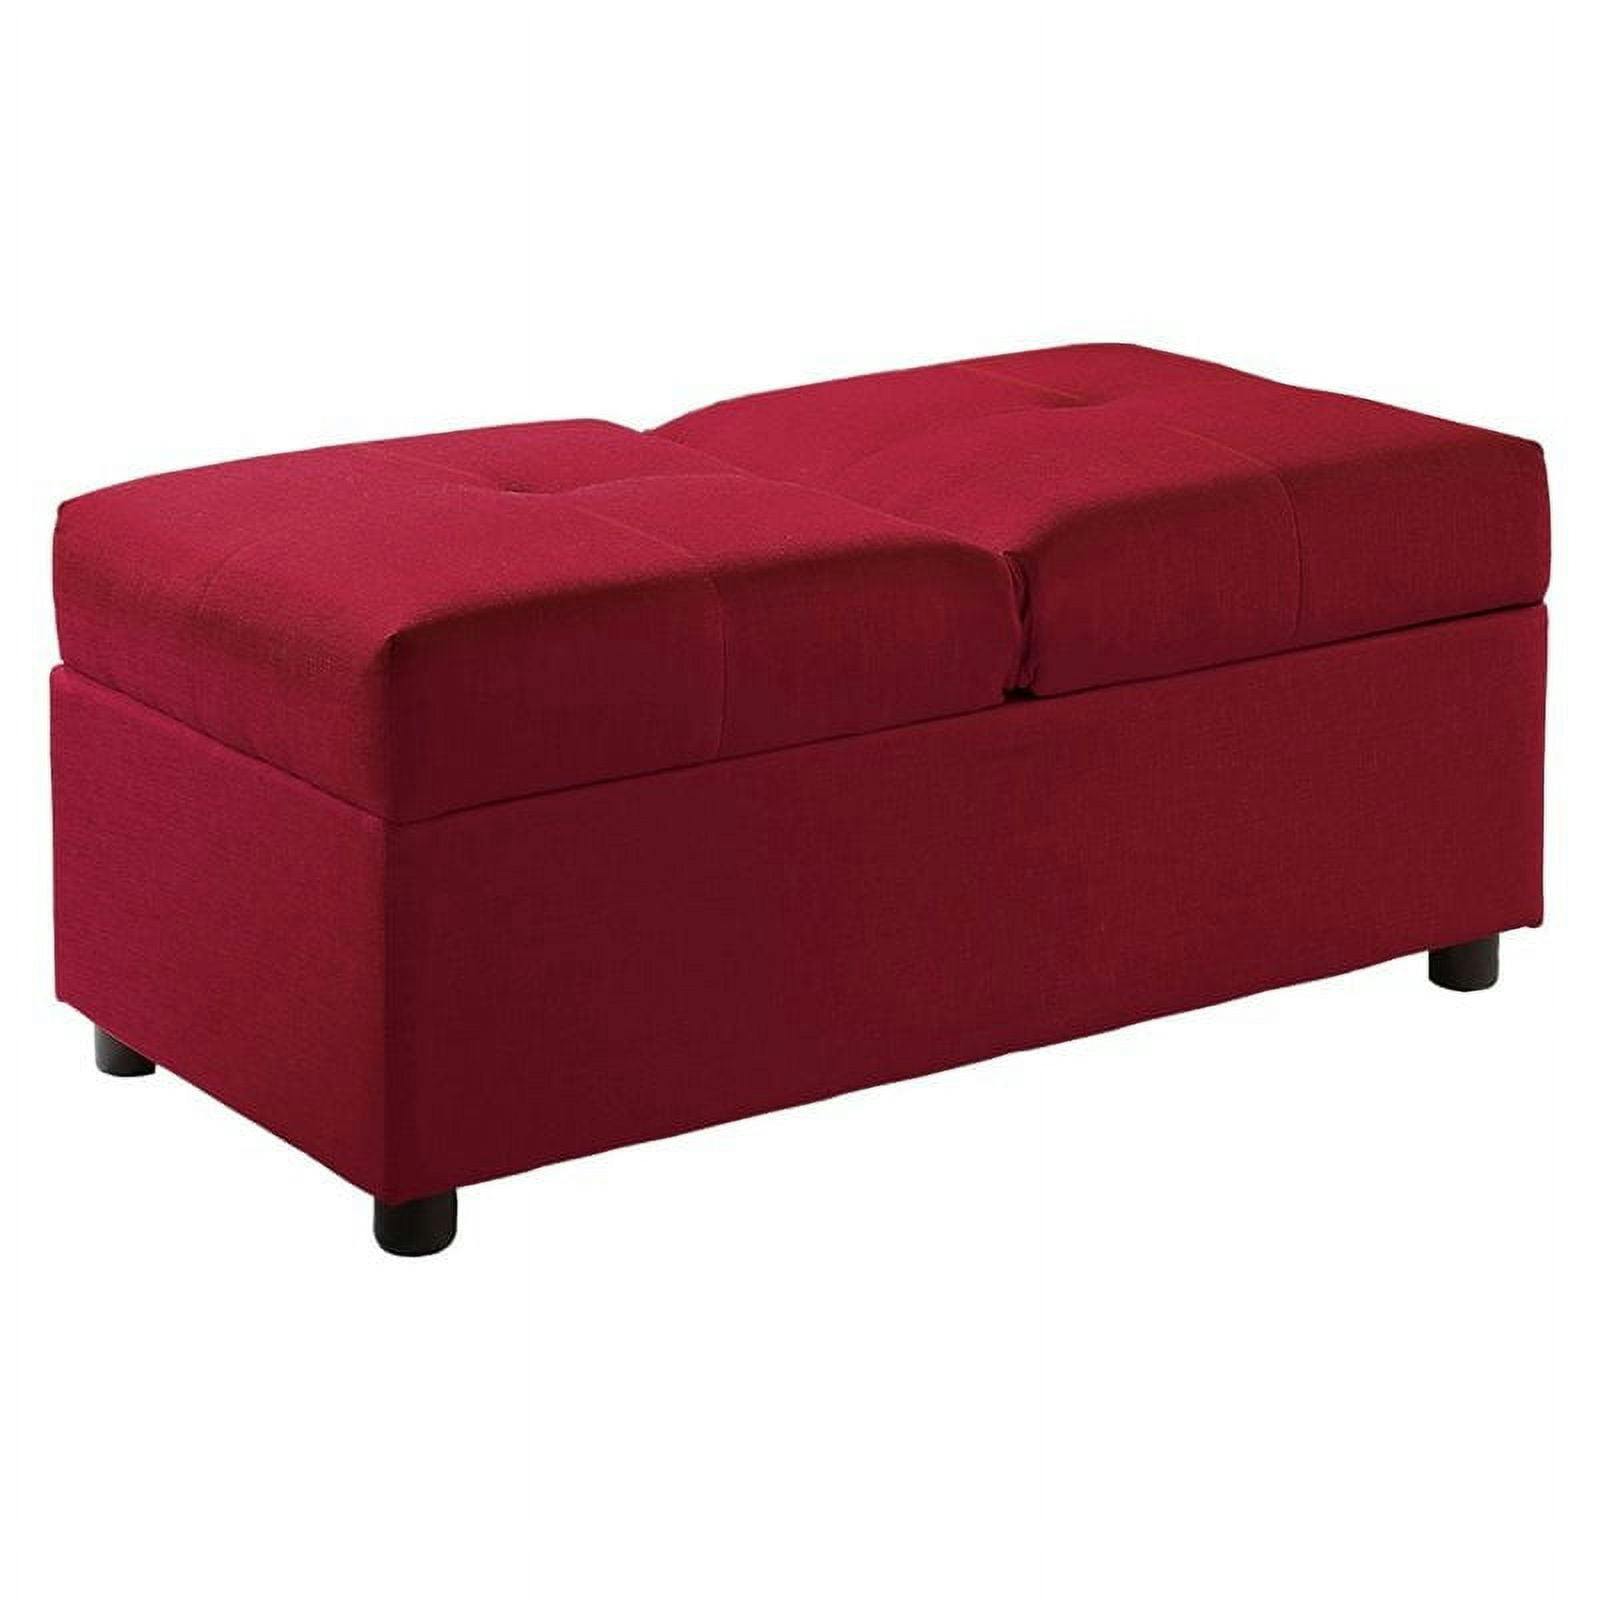 Contemporary Red Tufted Convertible Storage Ottoman Chair